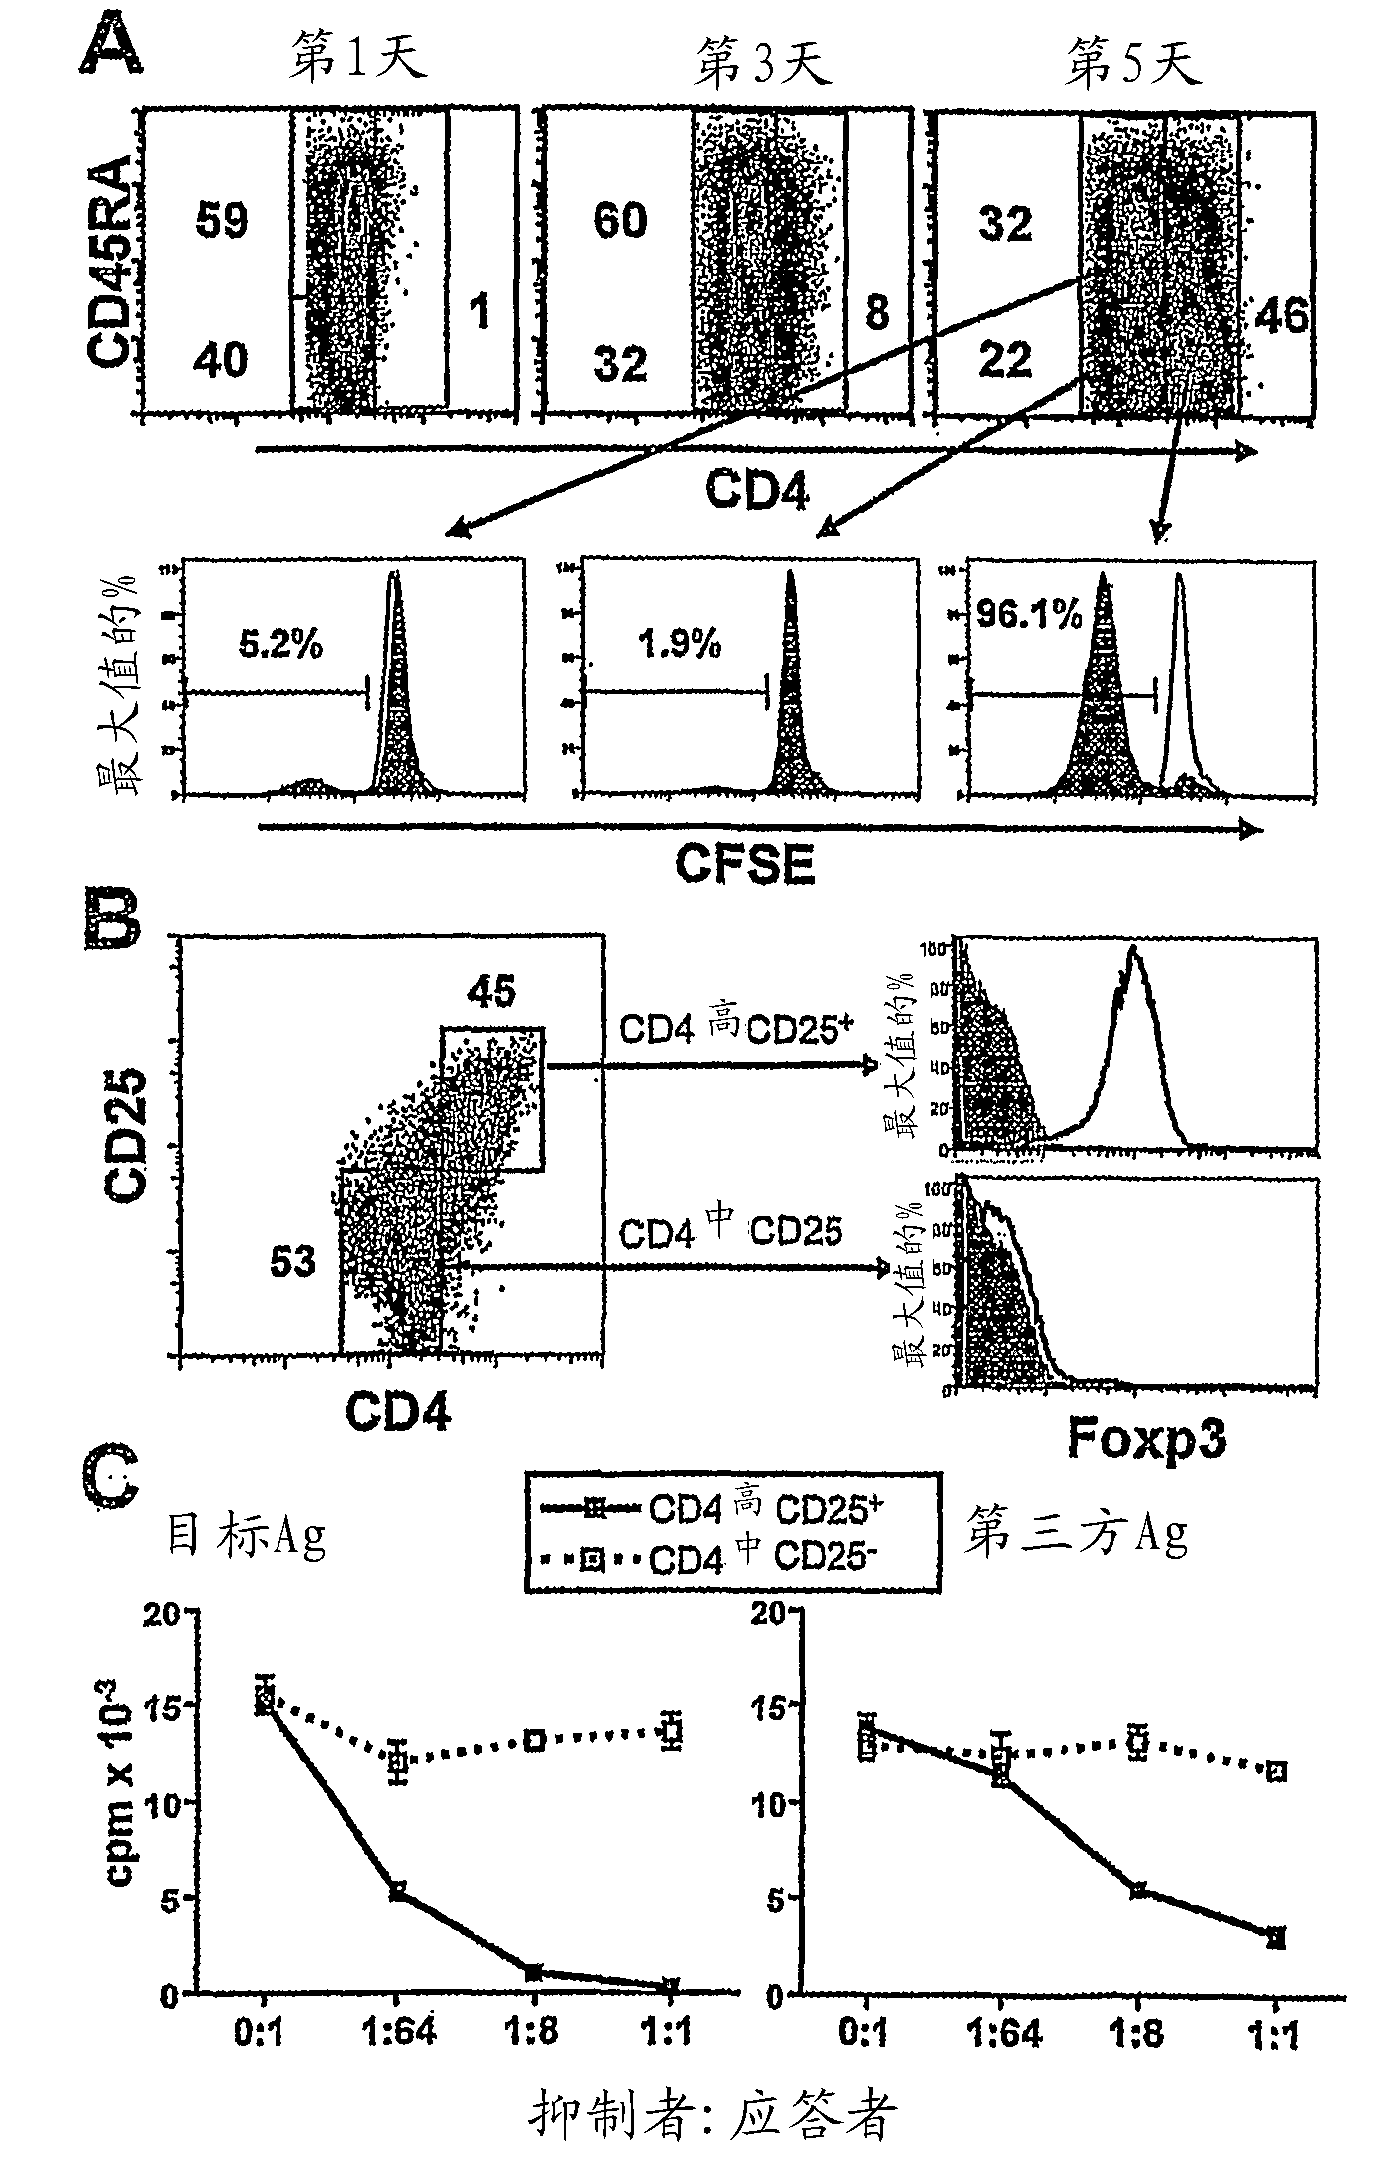 Method to induce and expand therapeutic alloantigen-specific human regulatory T cells in large-scale